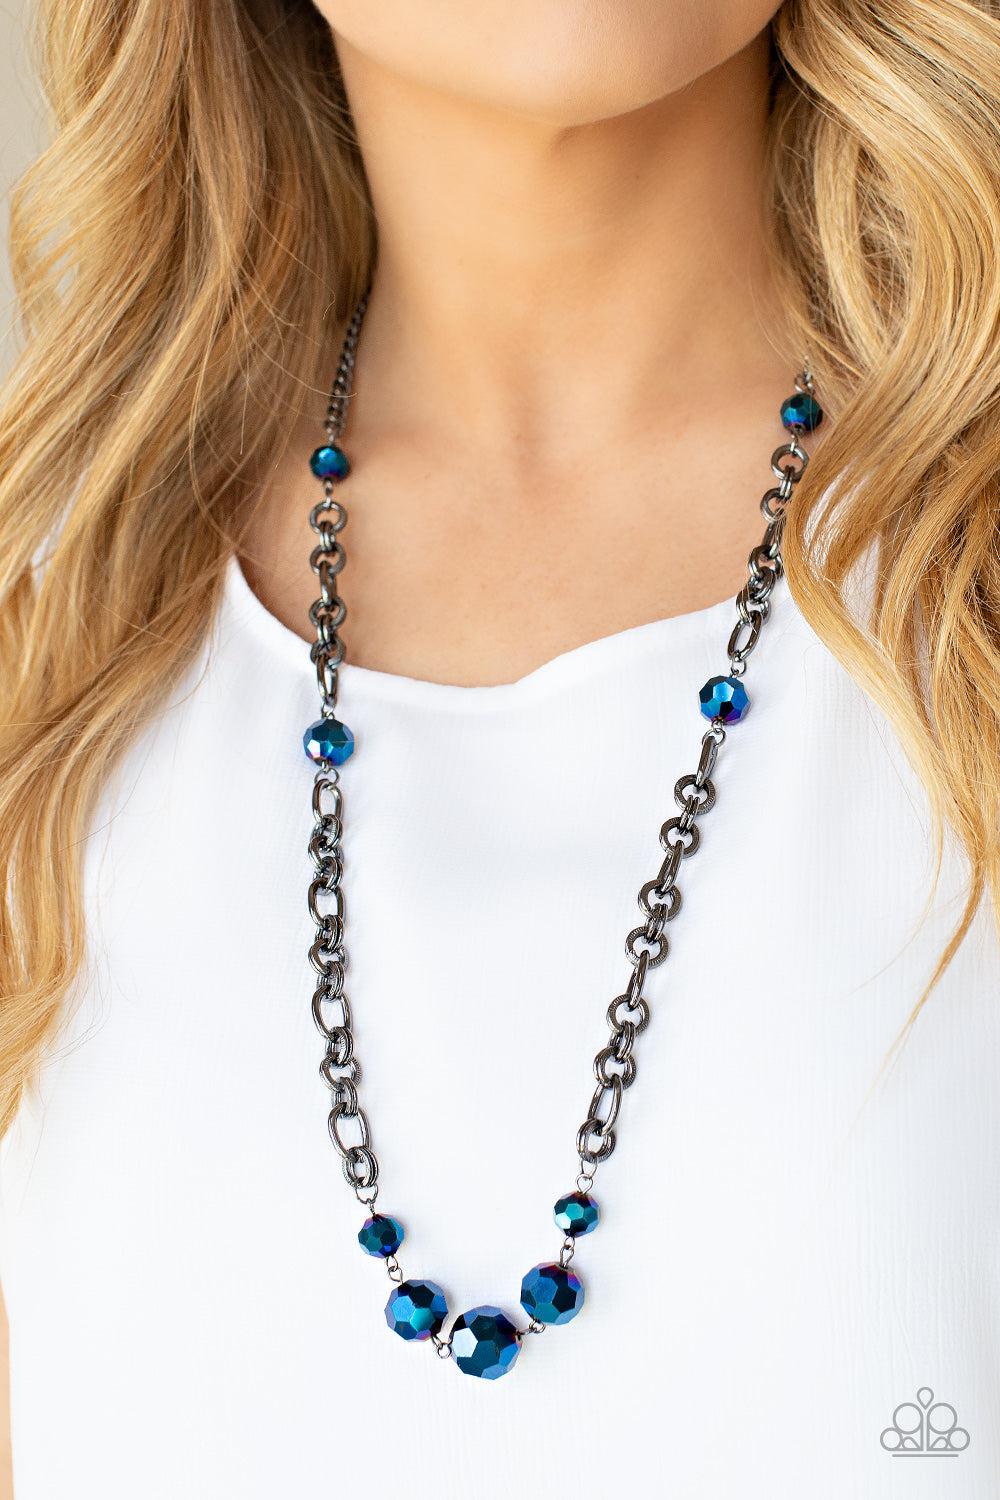 Prismatic Pick-Me-Up Multi &quot;Oil Spill&quot; Blue &amp; Gunmetal Necklace - Paparazzi Accessories-on model - CarasShop.com - $5 Jewelry by Cara Jewels